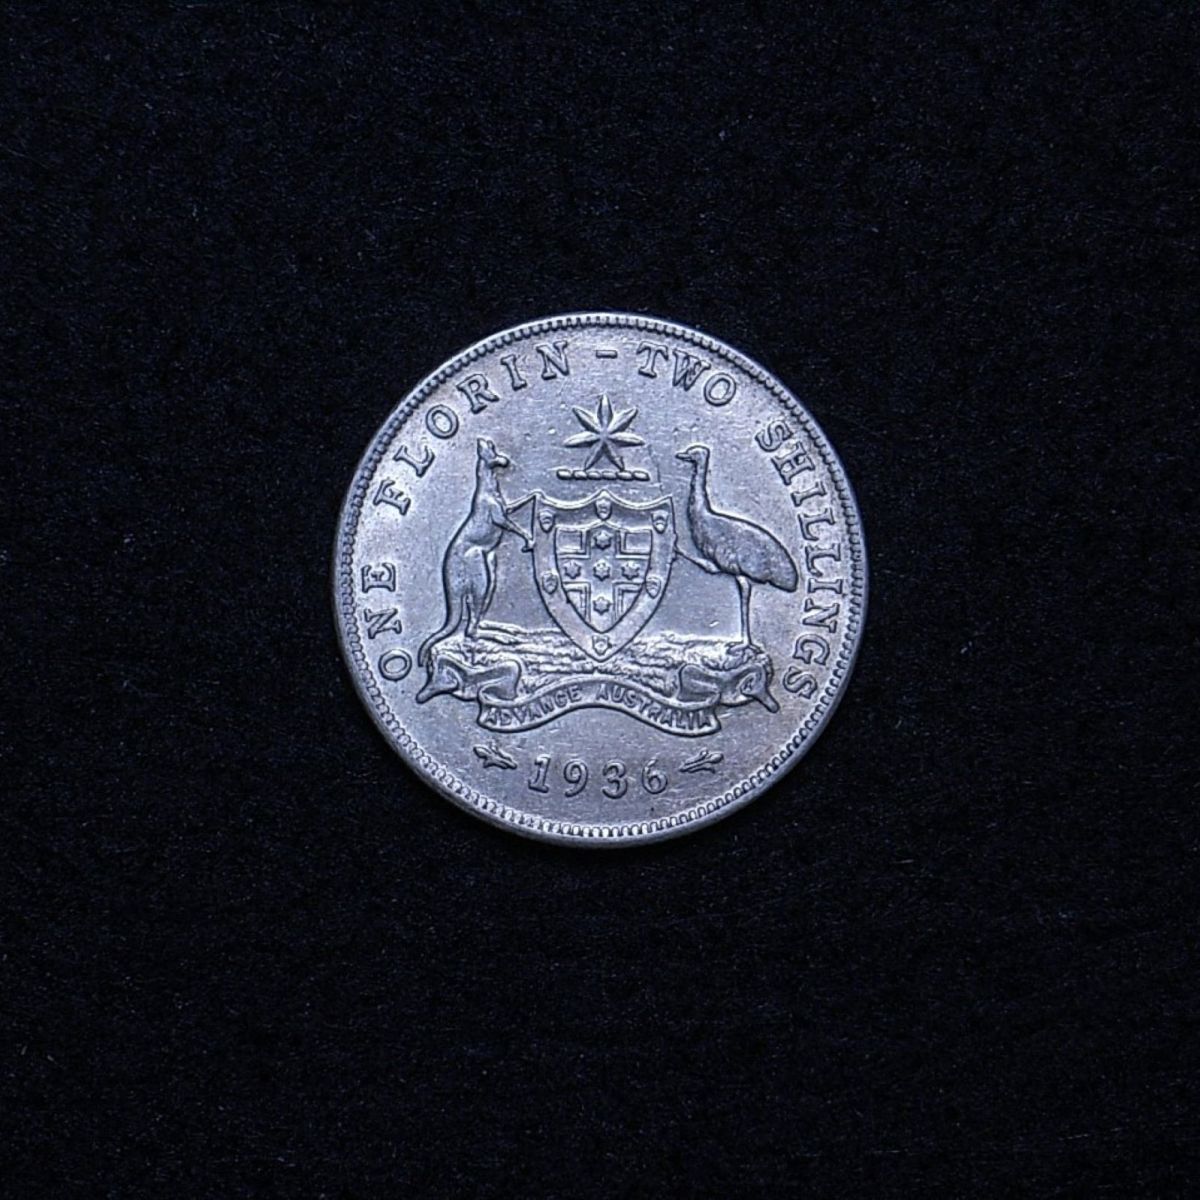 Aus Florin 1936 reverse showing overall appearance